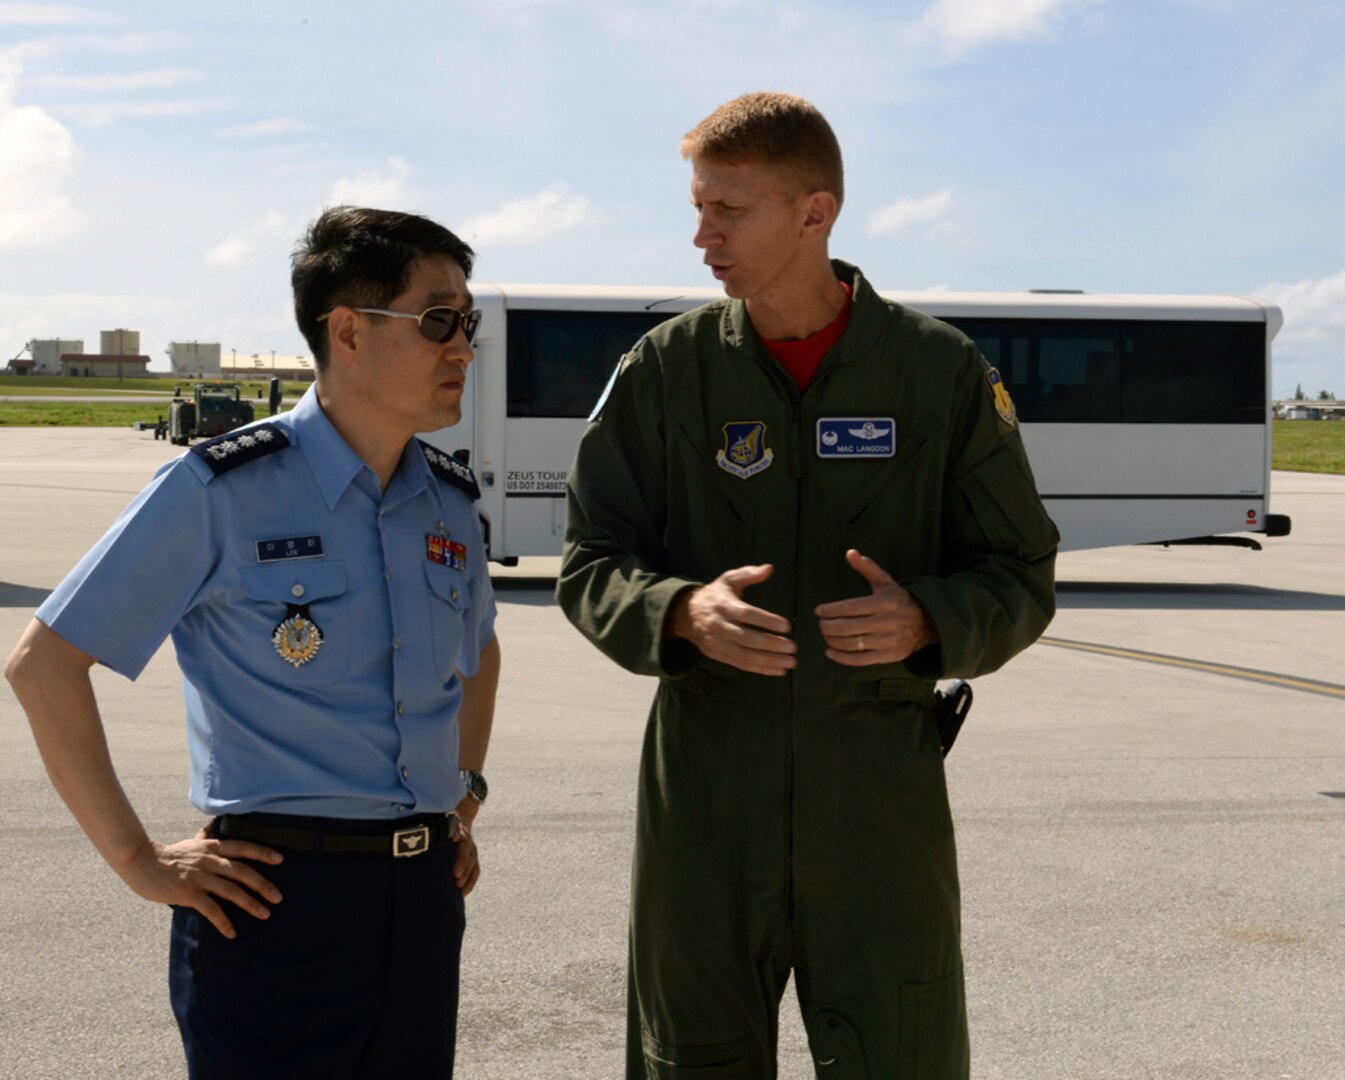 ANDERSEN AIR FORCE BASE, Guam (Jan. 30, 2015) -  U.S. Air Force Col. Reid Langdon, 36th Operations Group commander, discusses Andersen missions to a member of a Korean National Defense University class composed of nearly 100 new generals and admirals.  The class visited Andersen as a capstone event that allowed them to meet with U.S. military leaders both at Andersen and U.S. Pacific Command at Joint Base Pearl Harbor-Hickam, Hawaii, to learn about key issues and capabilities. 